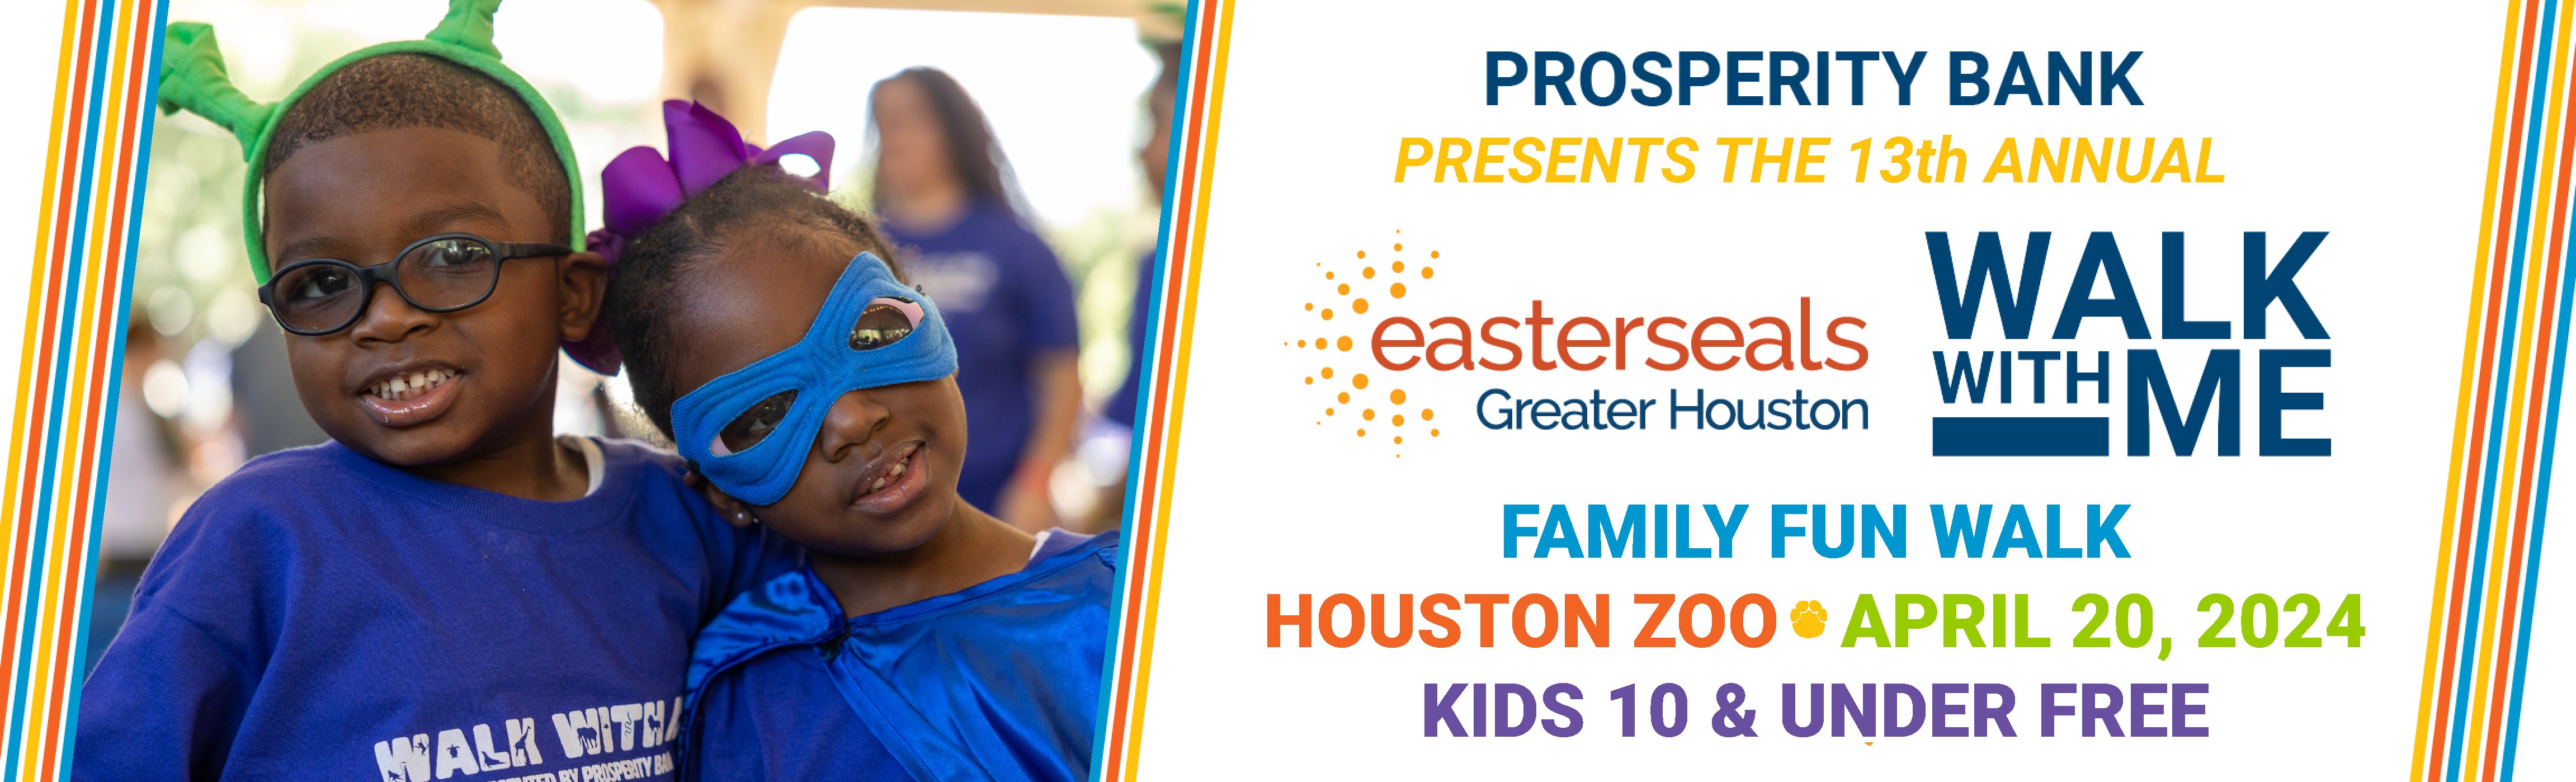 Prosperity Bank presents the 13th Annual Easter Seals Greater Houston Walk With Me Houston - Family Fun Walk at the Houston Zoo on April 20th! Kids 10 & Under Free!